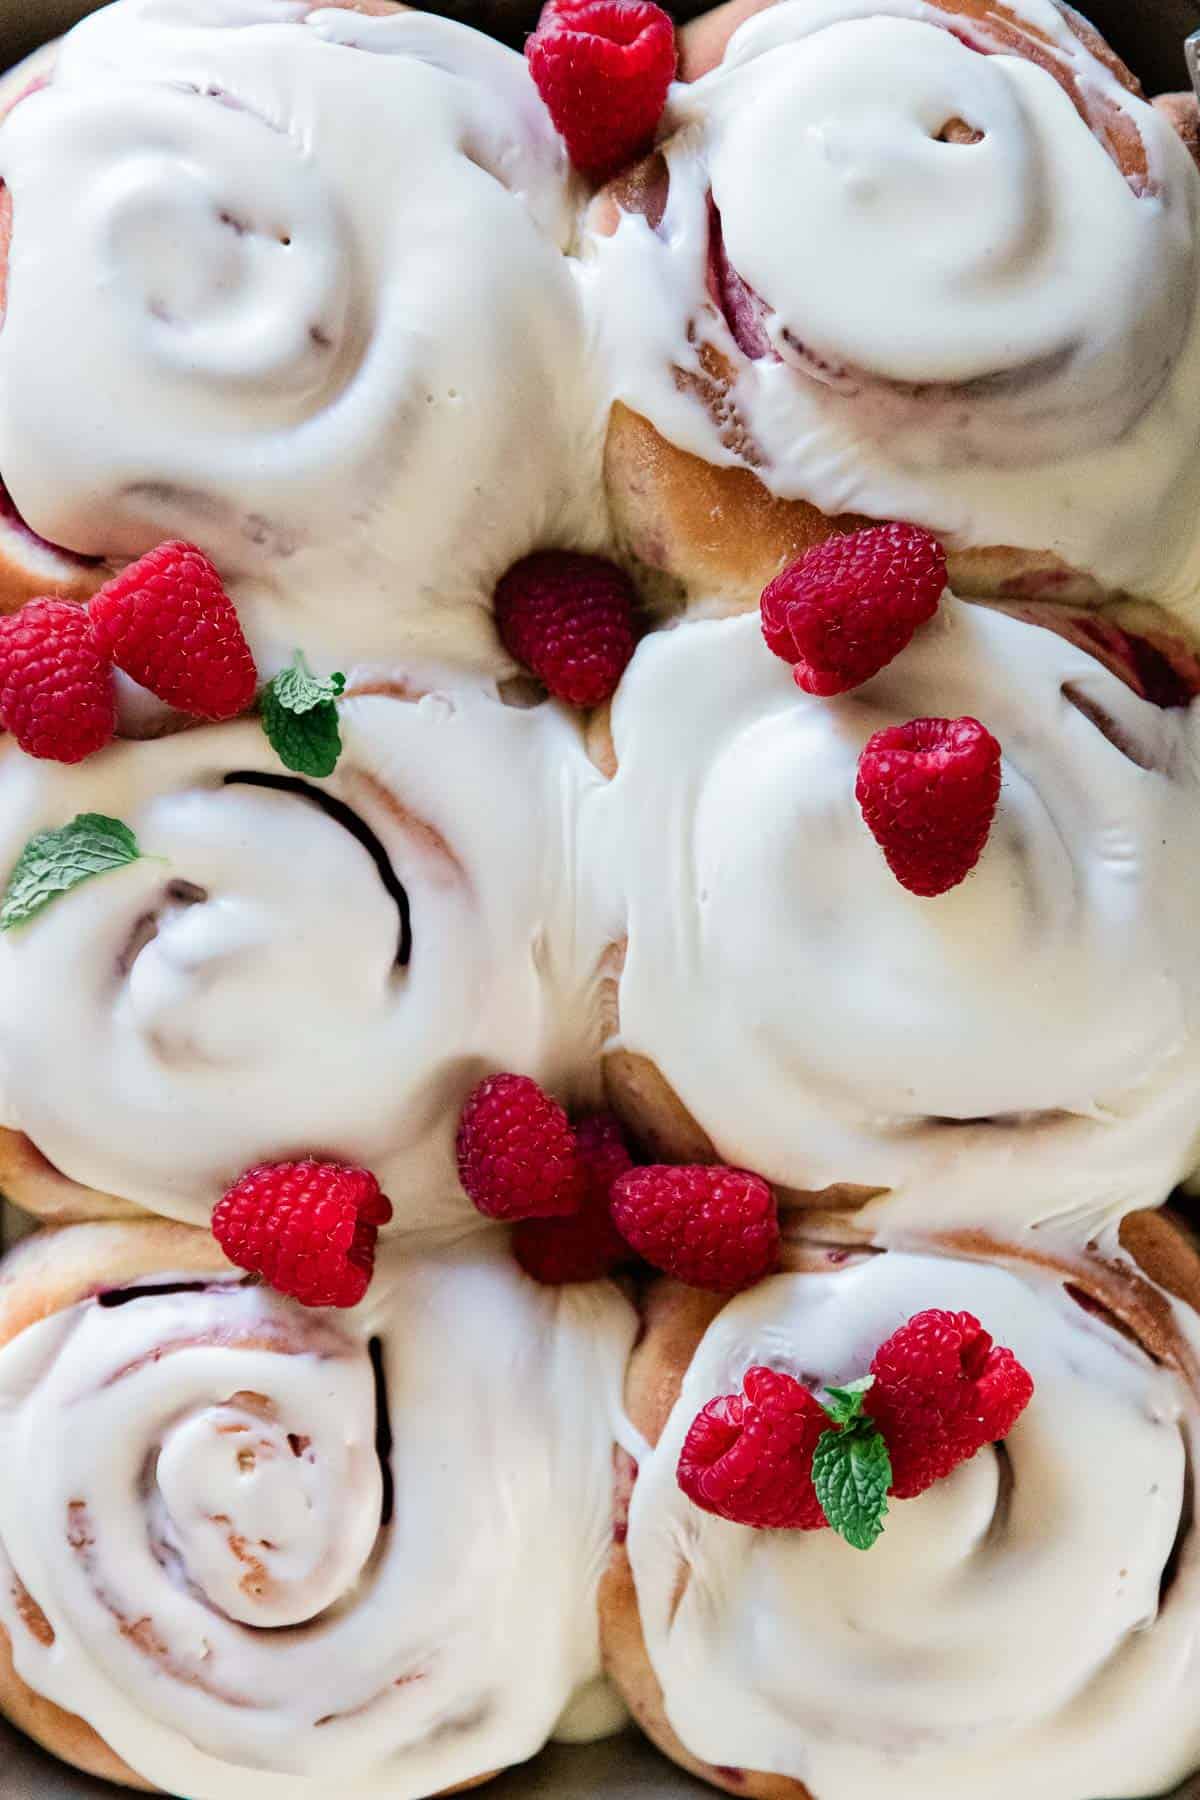 A close up of raspberry rolls frosted. They are garnished with fresh raspberries.